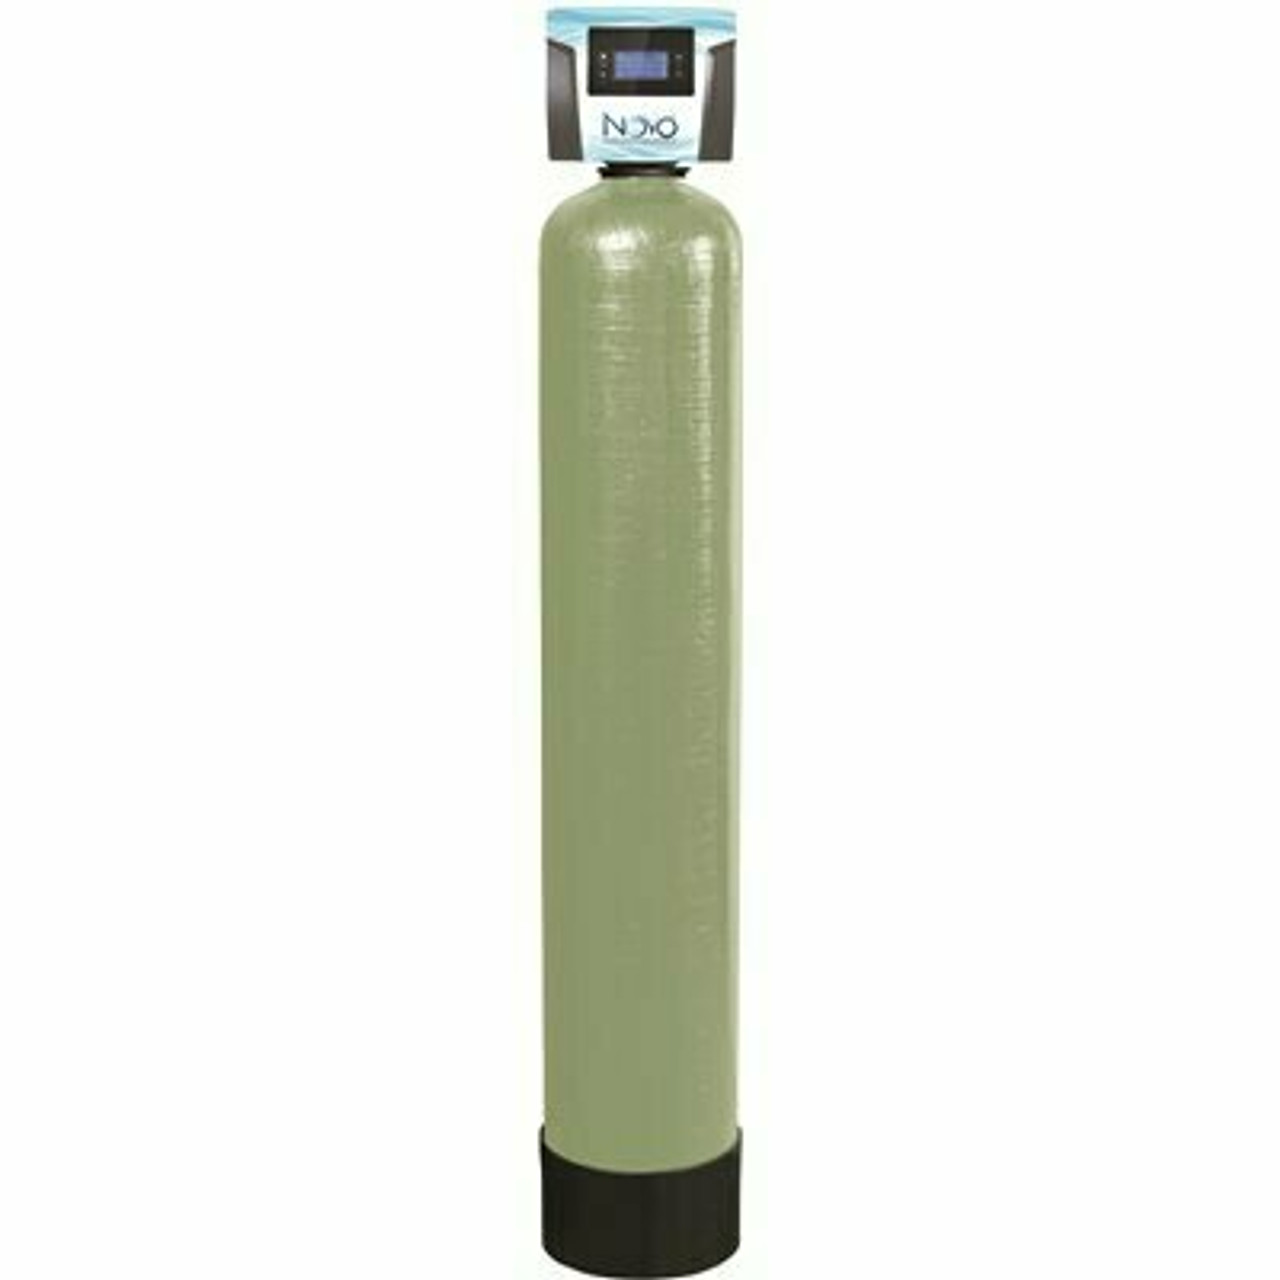 Novo 489 Series Whole House Iron And Sulfur Water Filtration System 489Aio-100 In Natural Tank